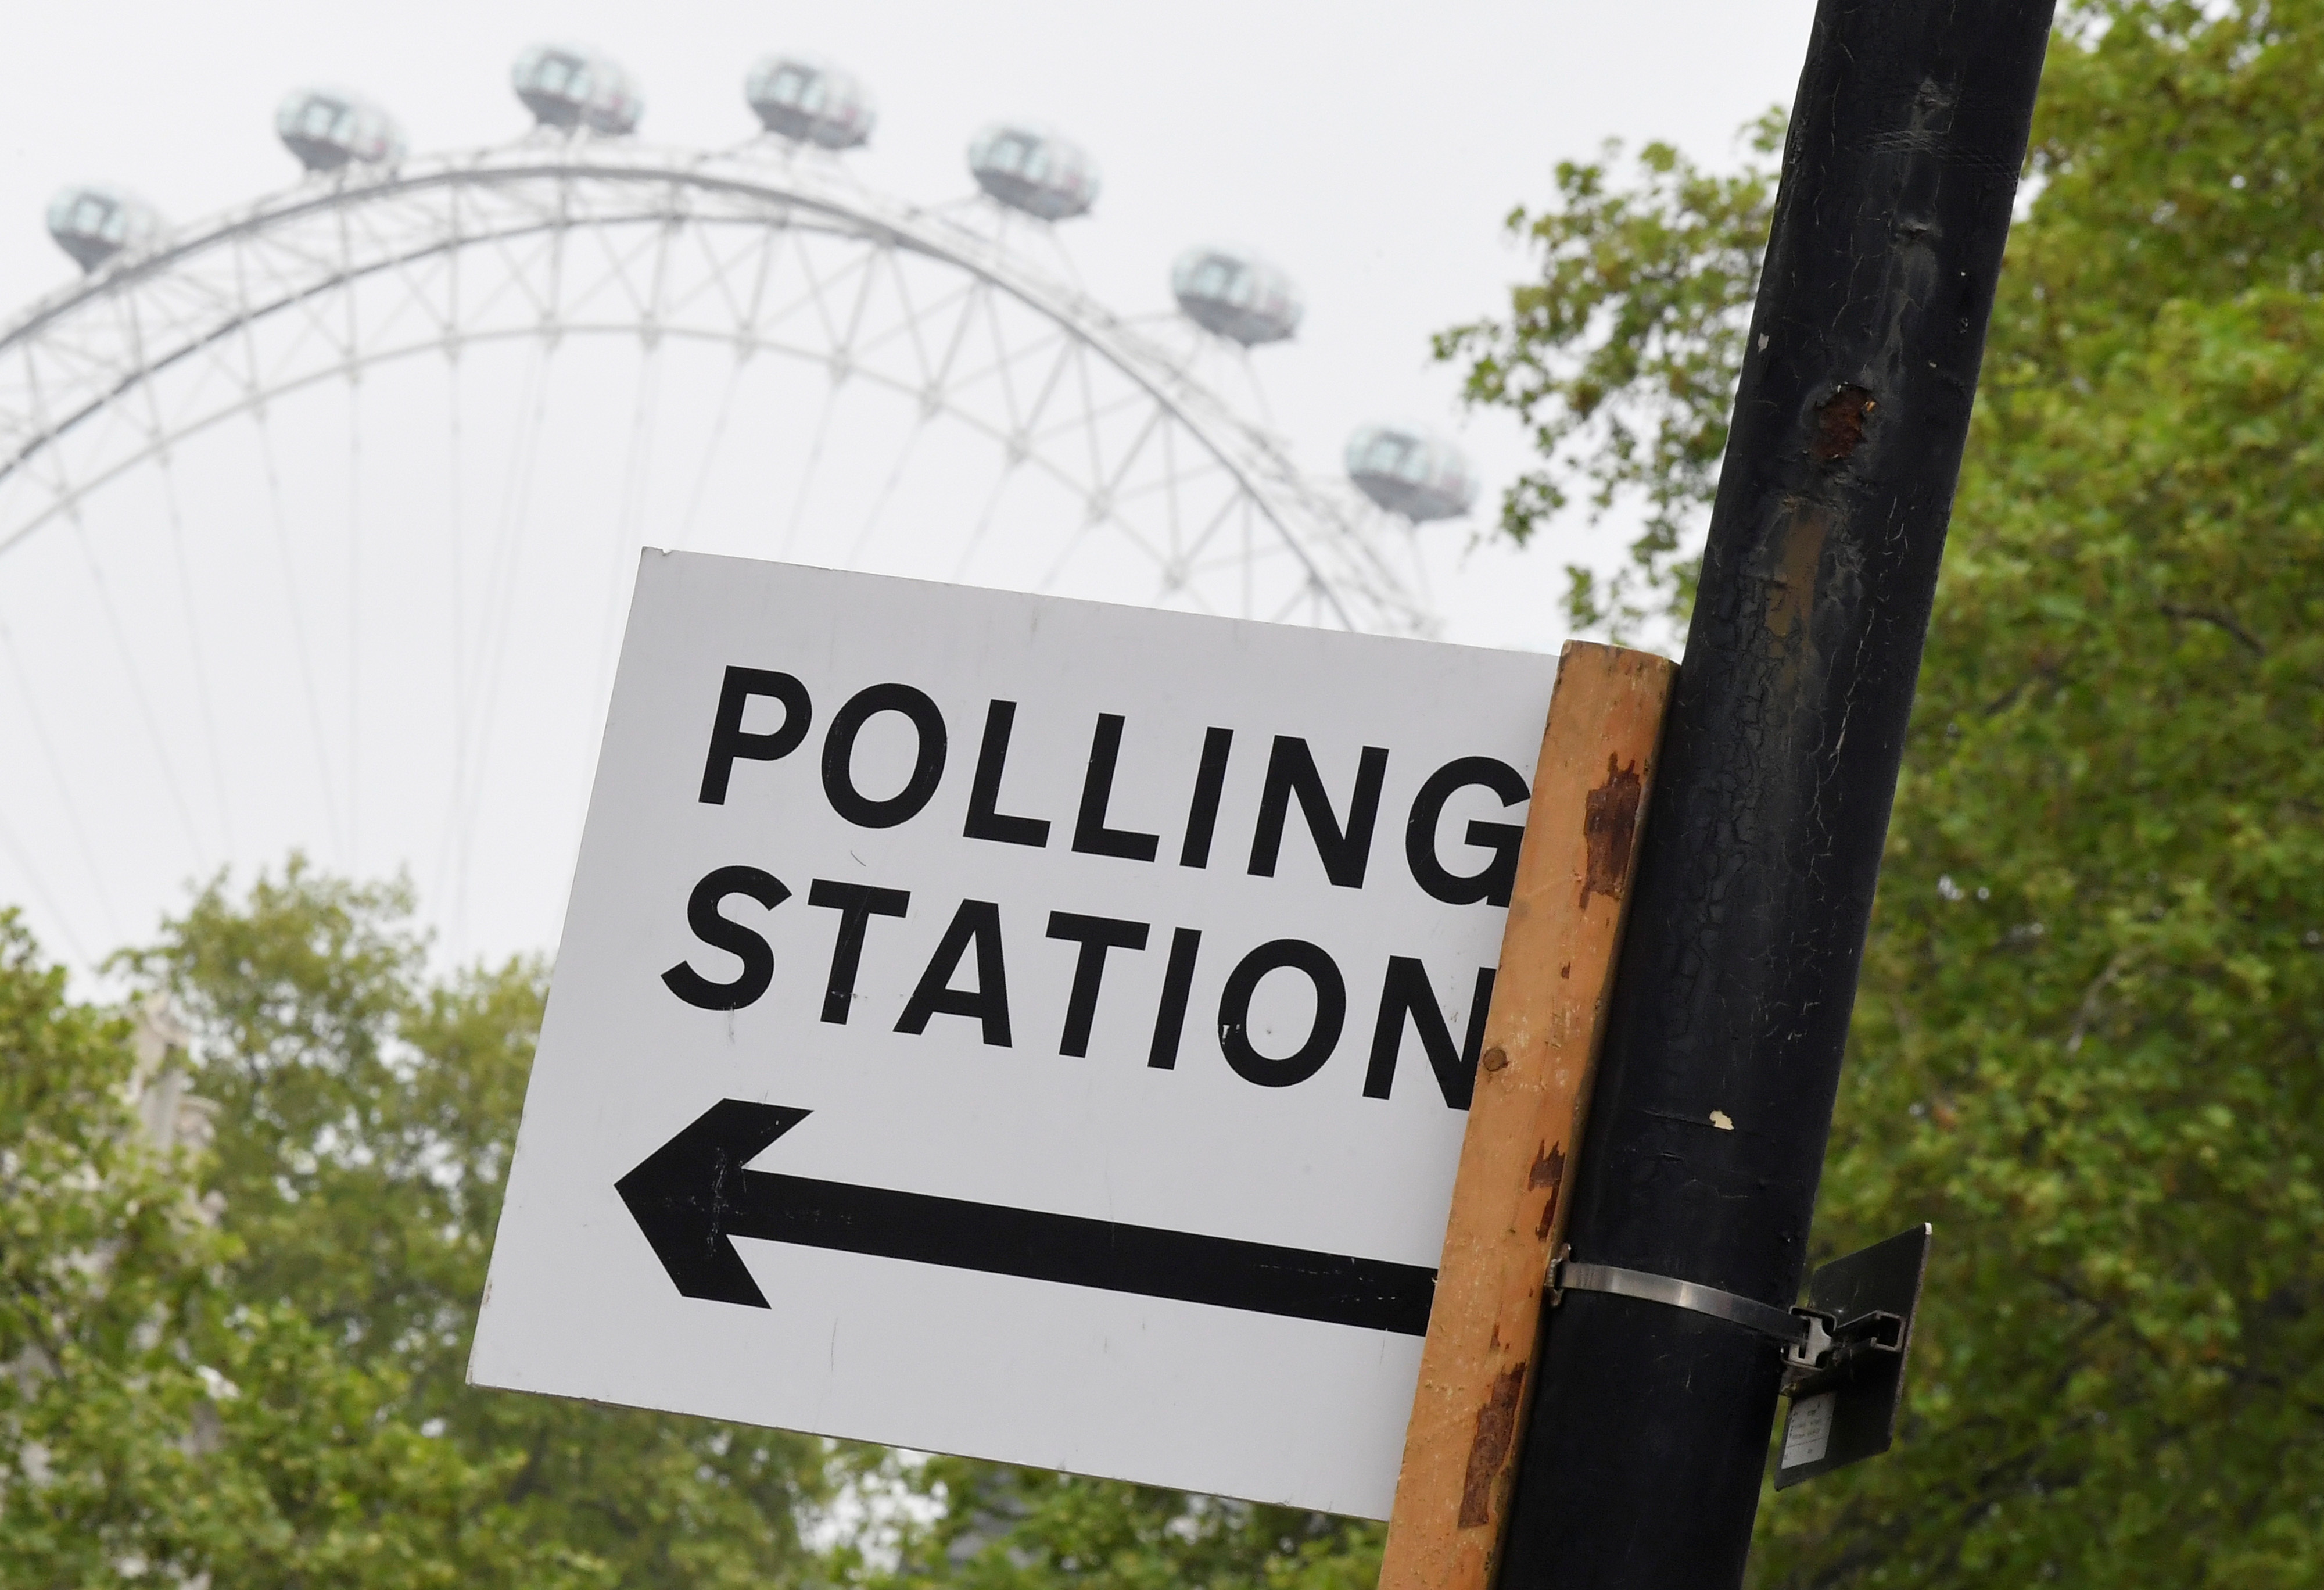 Knife crime and nights out: Misinformation narratives surrounding the London Mayoral Election